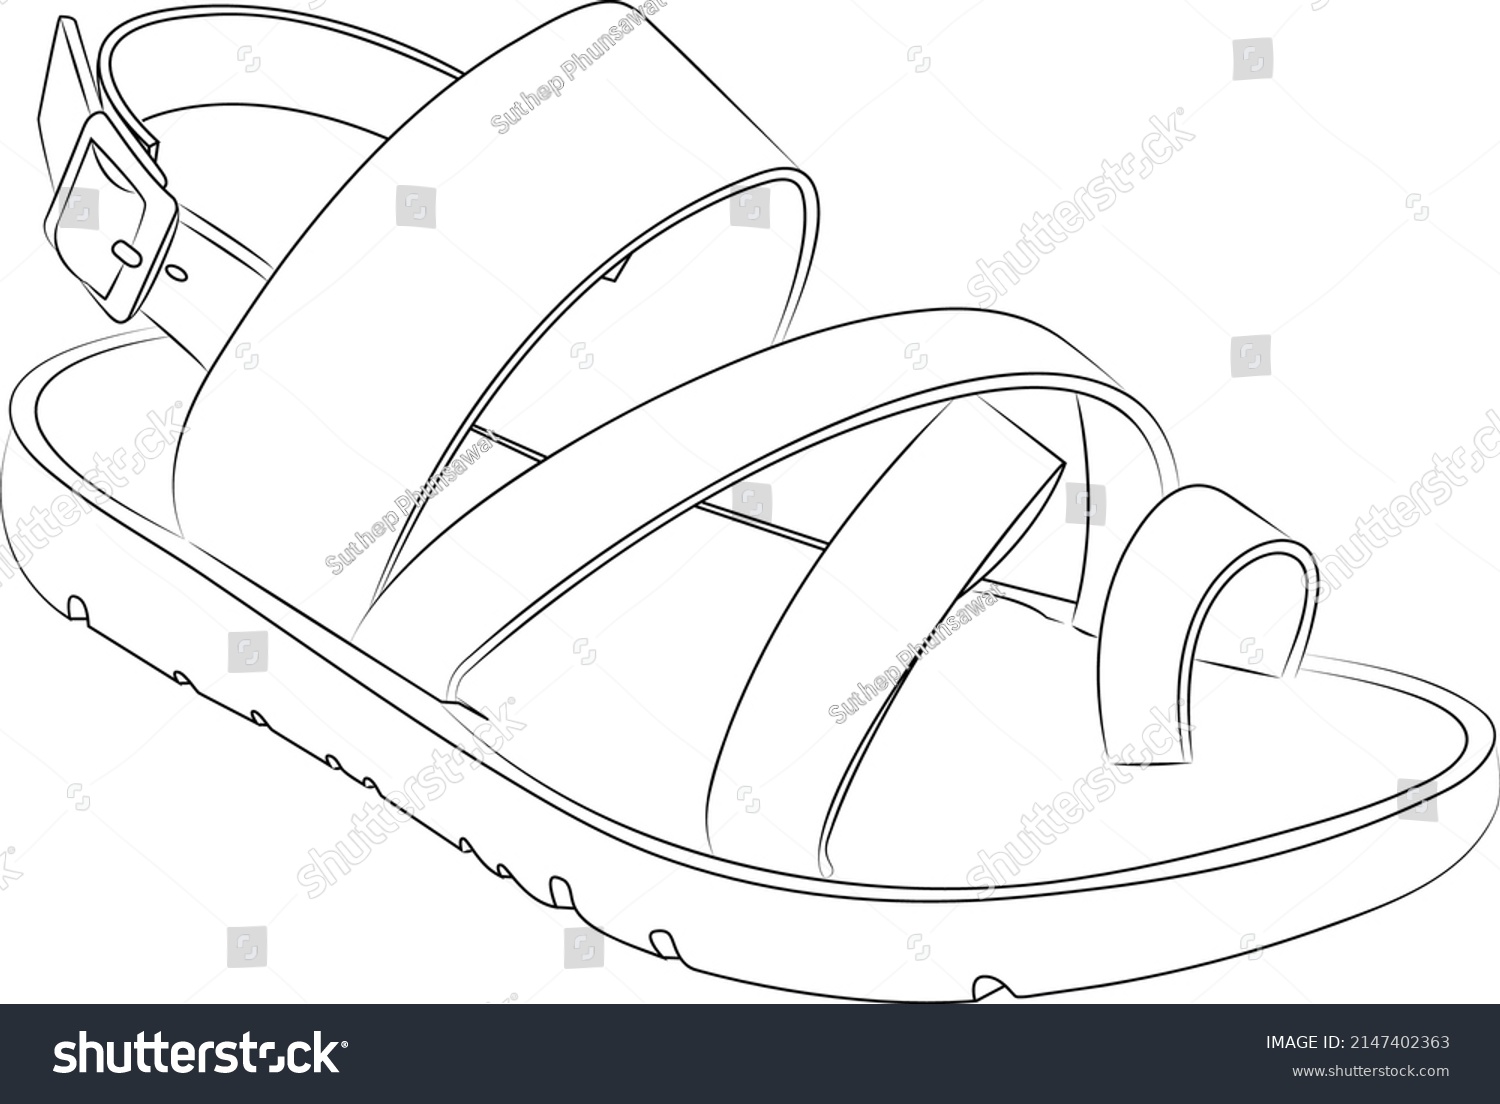 Shoes Outline Style Vector Design Element Stock Vector (Royalty Free ...